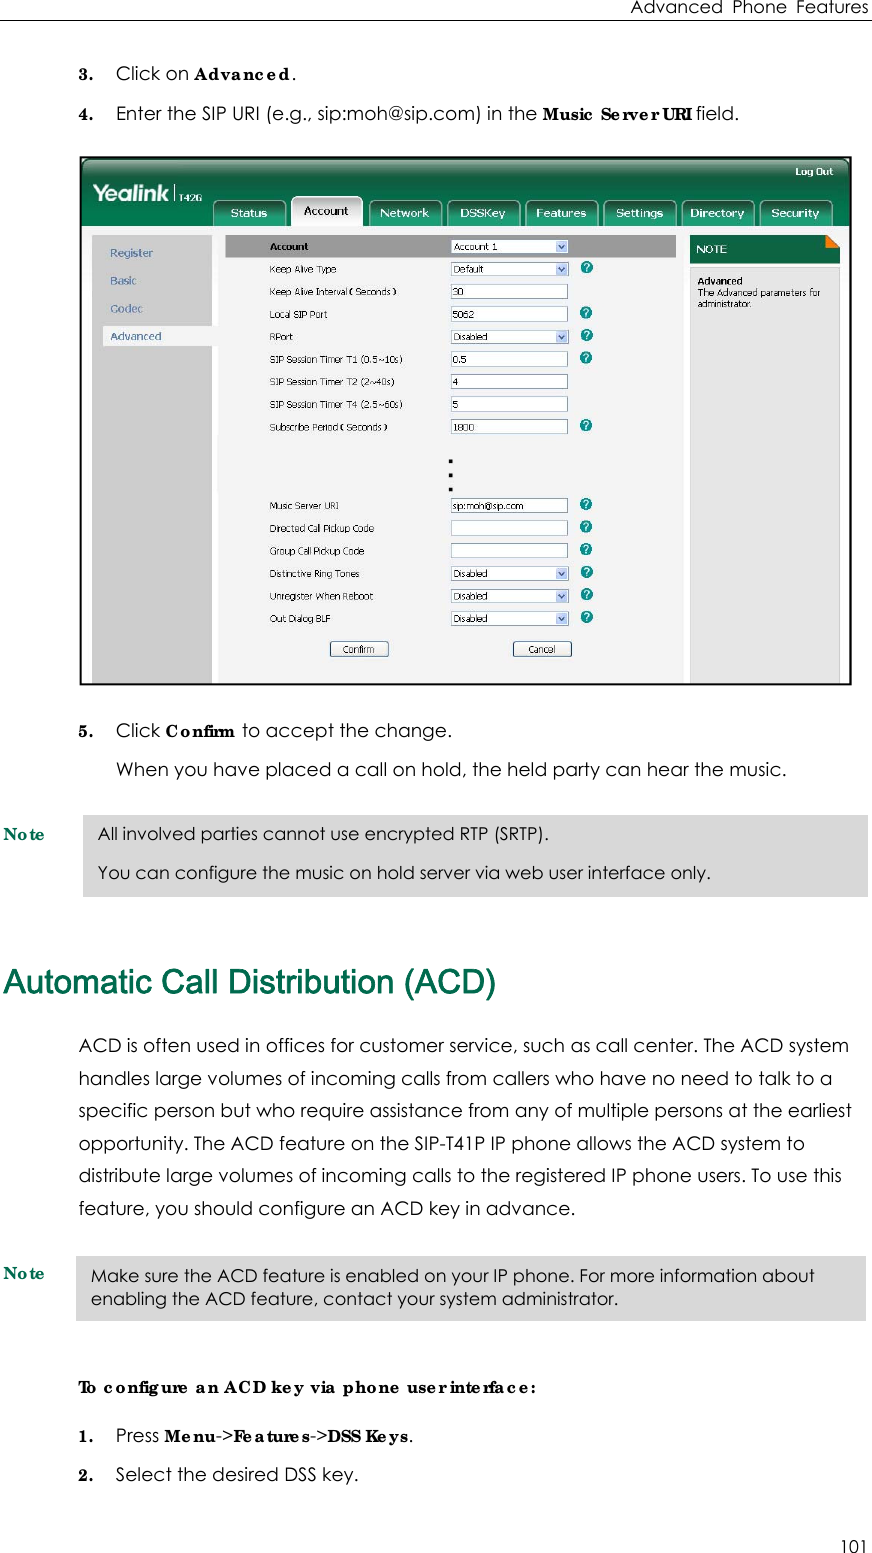 Advanced Phone Features 101 3. Click on Advanced. 4. Enter the SIP URI (e.g., sip:moh@sip.com) in the Music Server URI field.  5. Click Confirm to accept the change. When you have placed a call on hold, the held party can hear the music. Note Automatic Call Distribution (ACD) ACD is often used in offices for customer service, such as call center. The ACD system handles large volumes of incoming calls from callers who have no need to talk to a specific person but who require assistance from any of multiple persons at the earliest opportunity. The ACD feature on the SIP-T41P IP phone allows the ACD system to distribute large volumes of incoming calls to the registered IP phone users. To use this feature, you should configure an ACD key in advance. Note To configure an ACD key via phone user interface: 1. Press Menu-&gt;Features-&gt;DSS Keys. 2. Select the desired DSS key. All involved parties cannot use encrypted RTP (SRTP). You can configure the music on hold server via web user interface only. Make sure the ACD feature is enabled on your IP phone. For more information about enabling the ACD feature, contact your system administrator. 